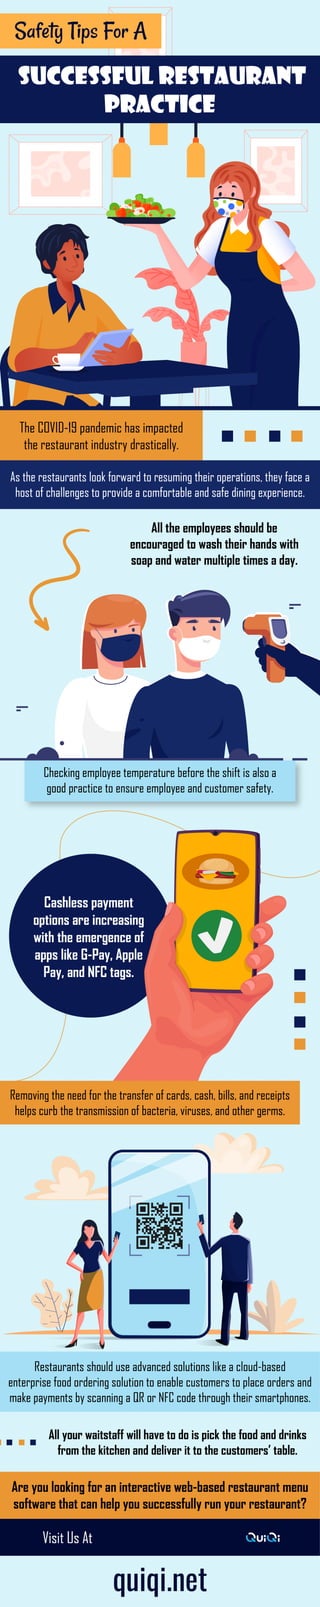 Safety tips for a successful restaurant practice